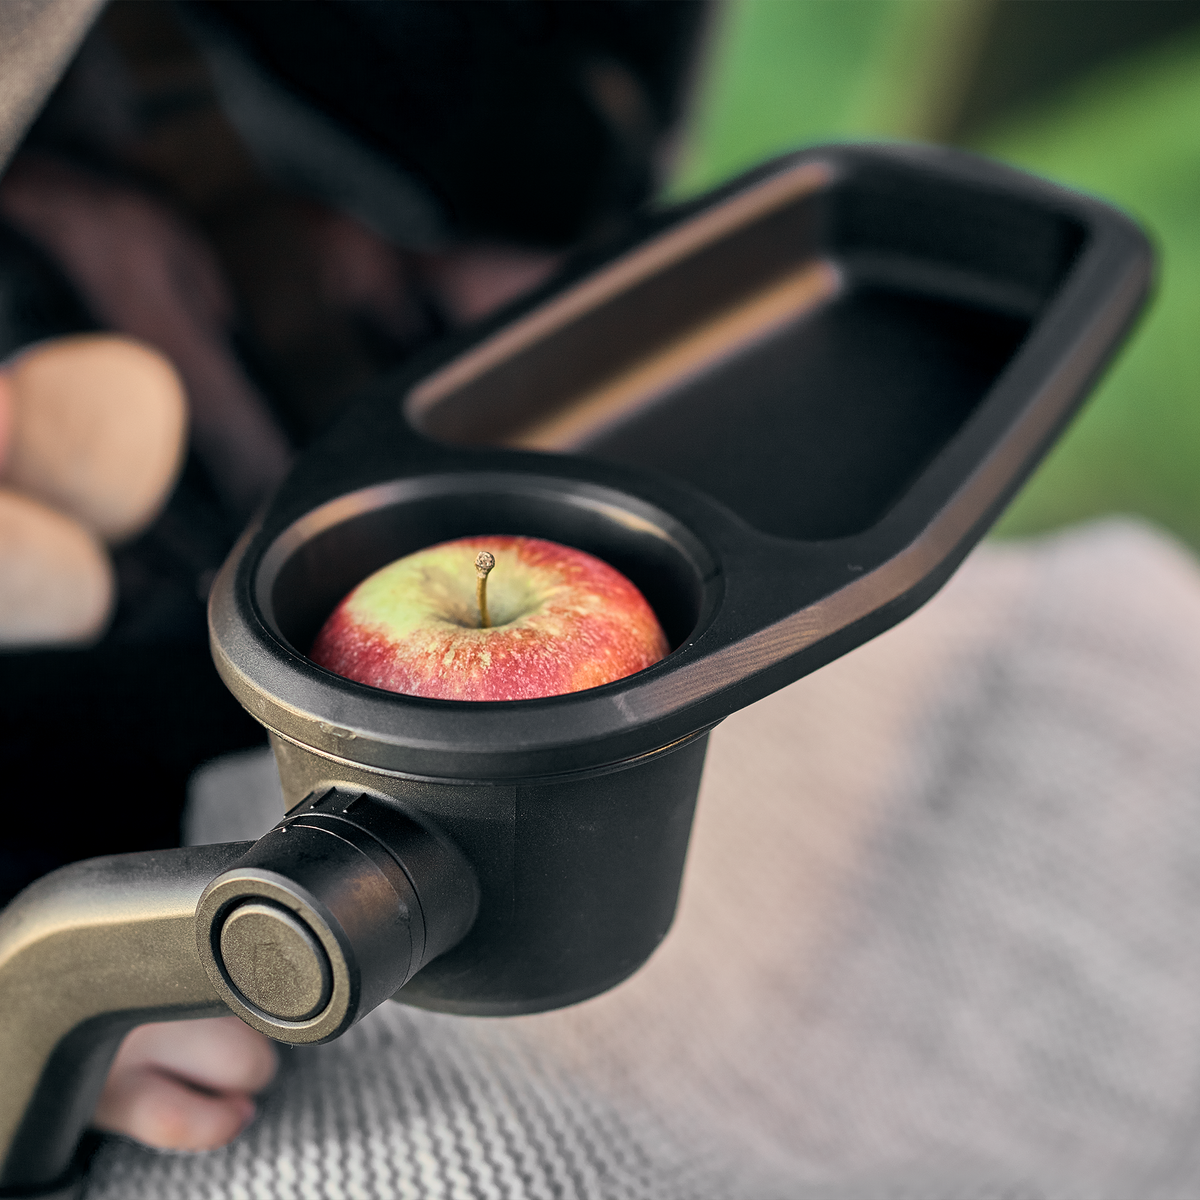 A close-up of an apple placed inside a Thule Stroller Snack Tray.